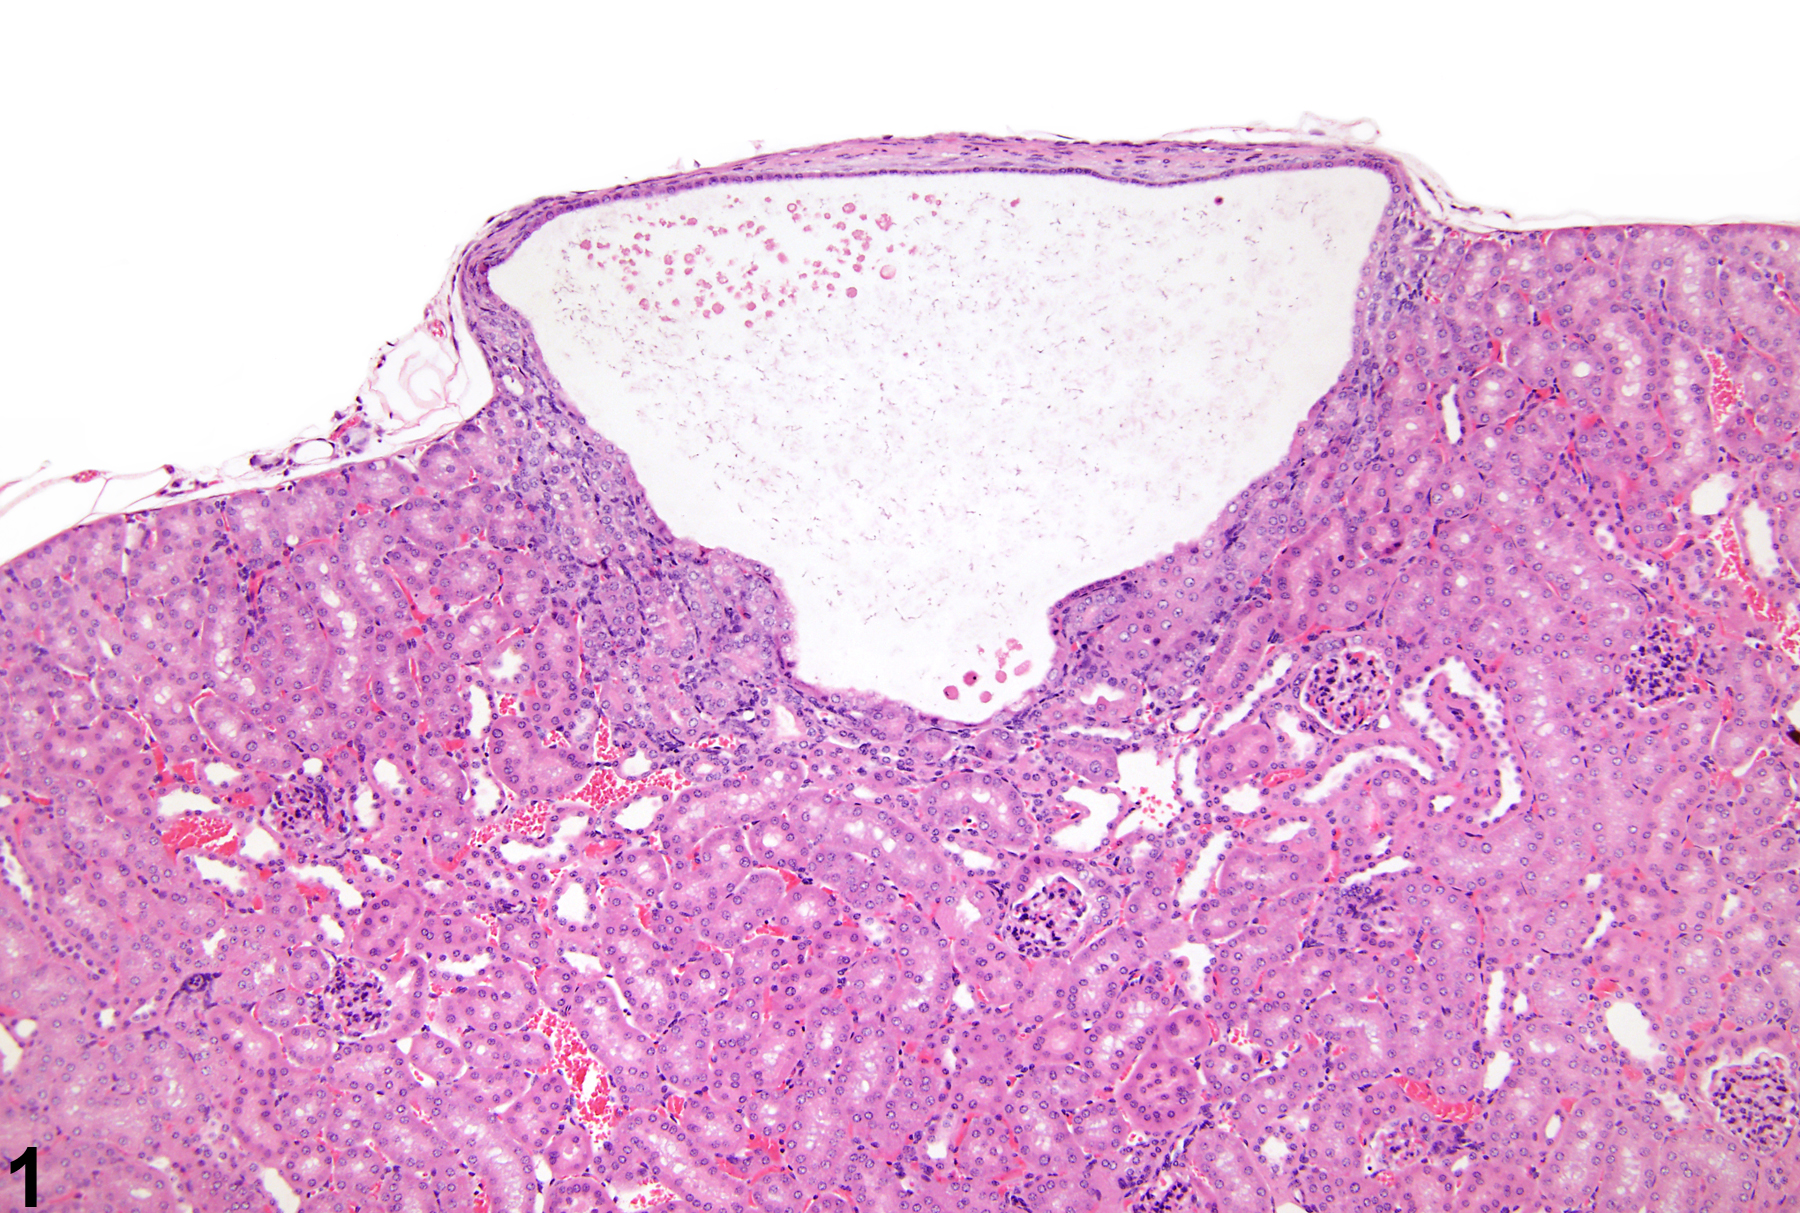 Image of cyst in the kidney from a male Tg.Ac (FVB/N) hemizygous mouse in a subchronic study